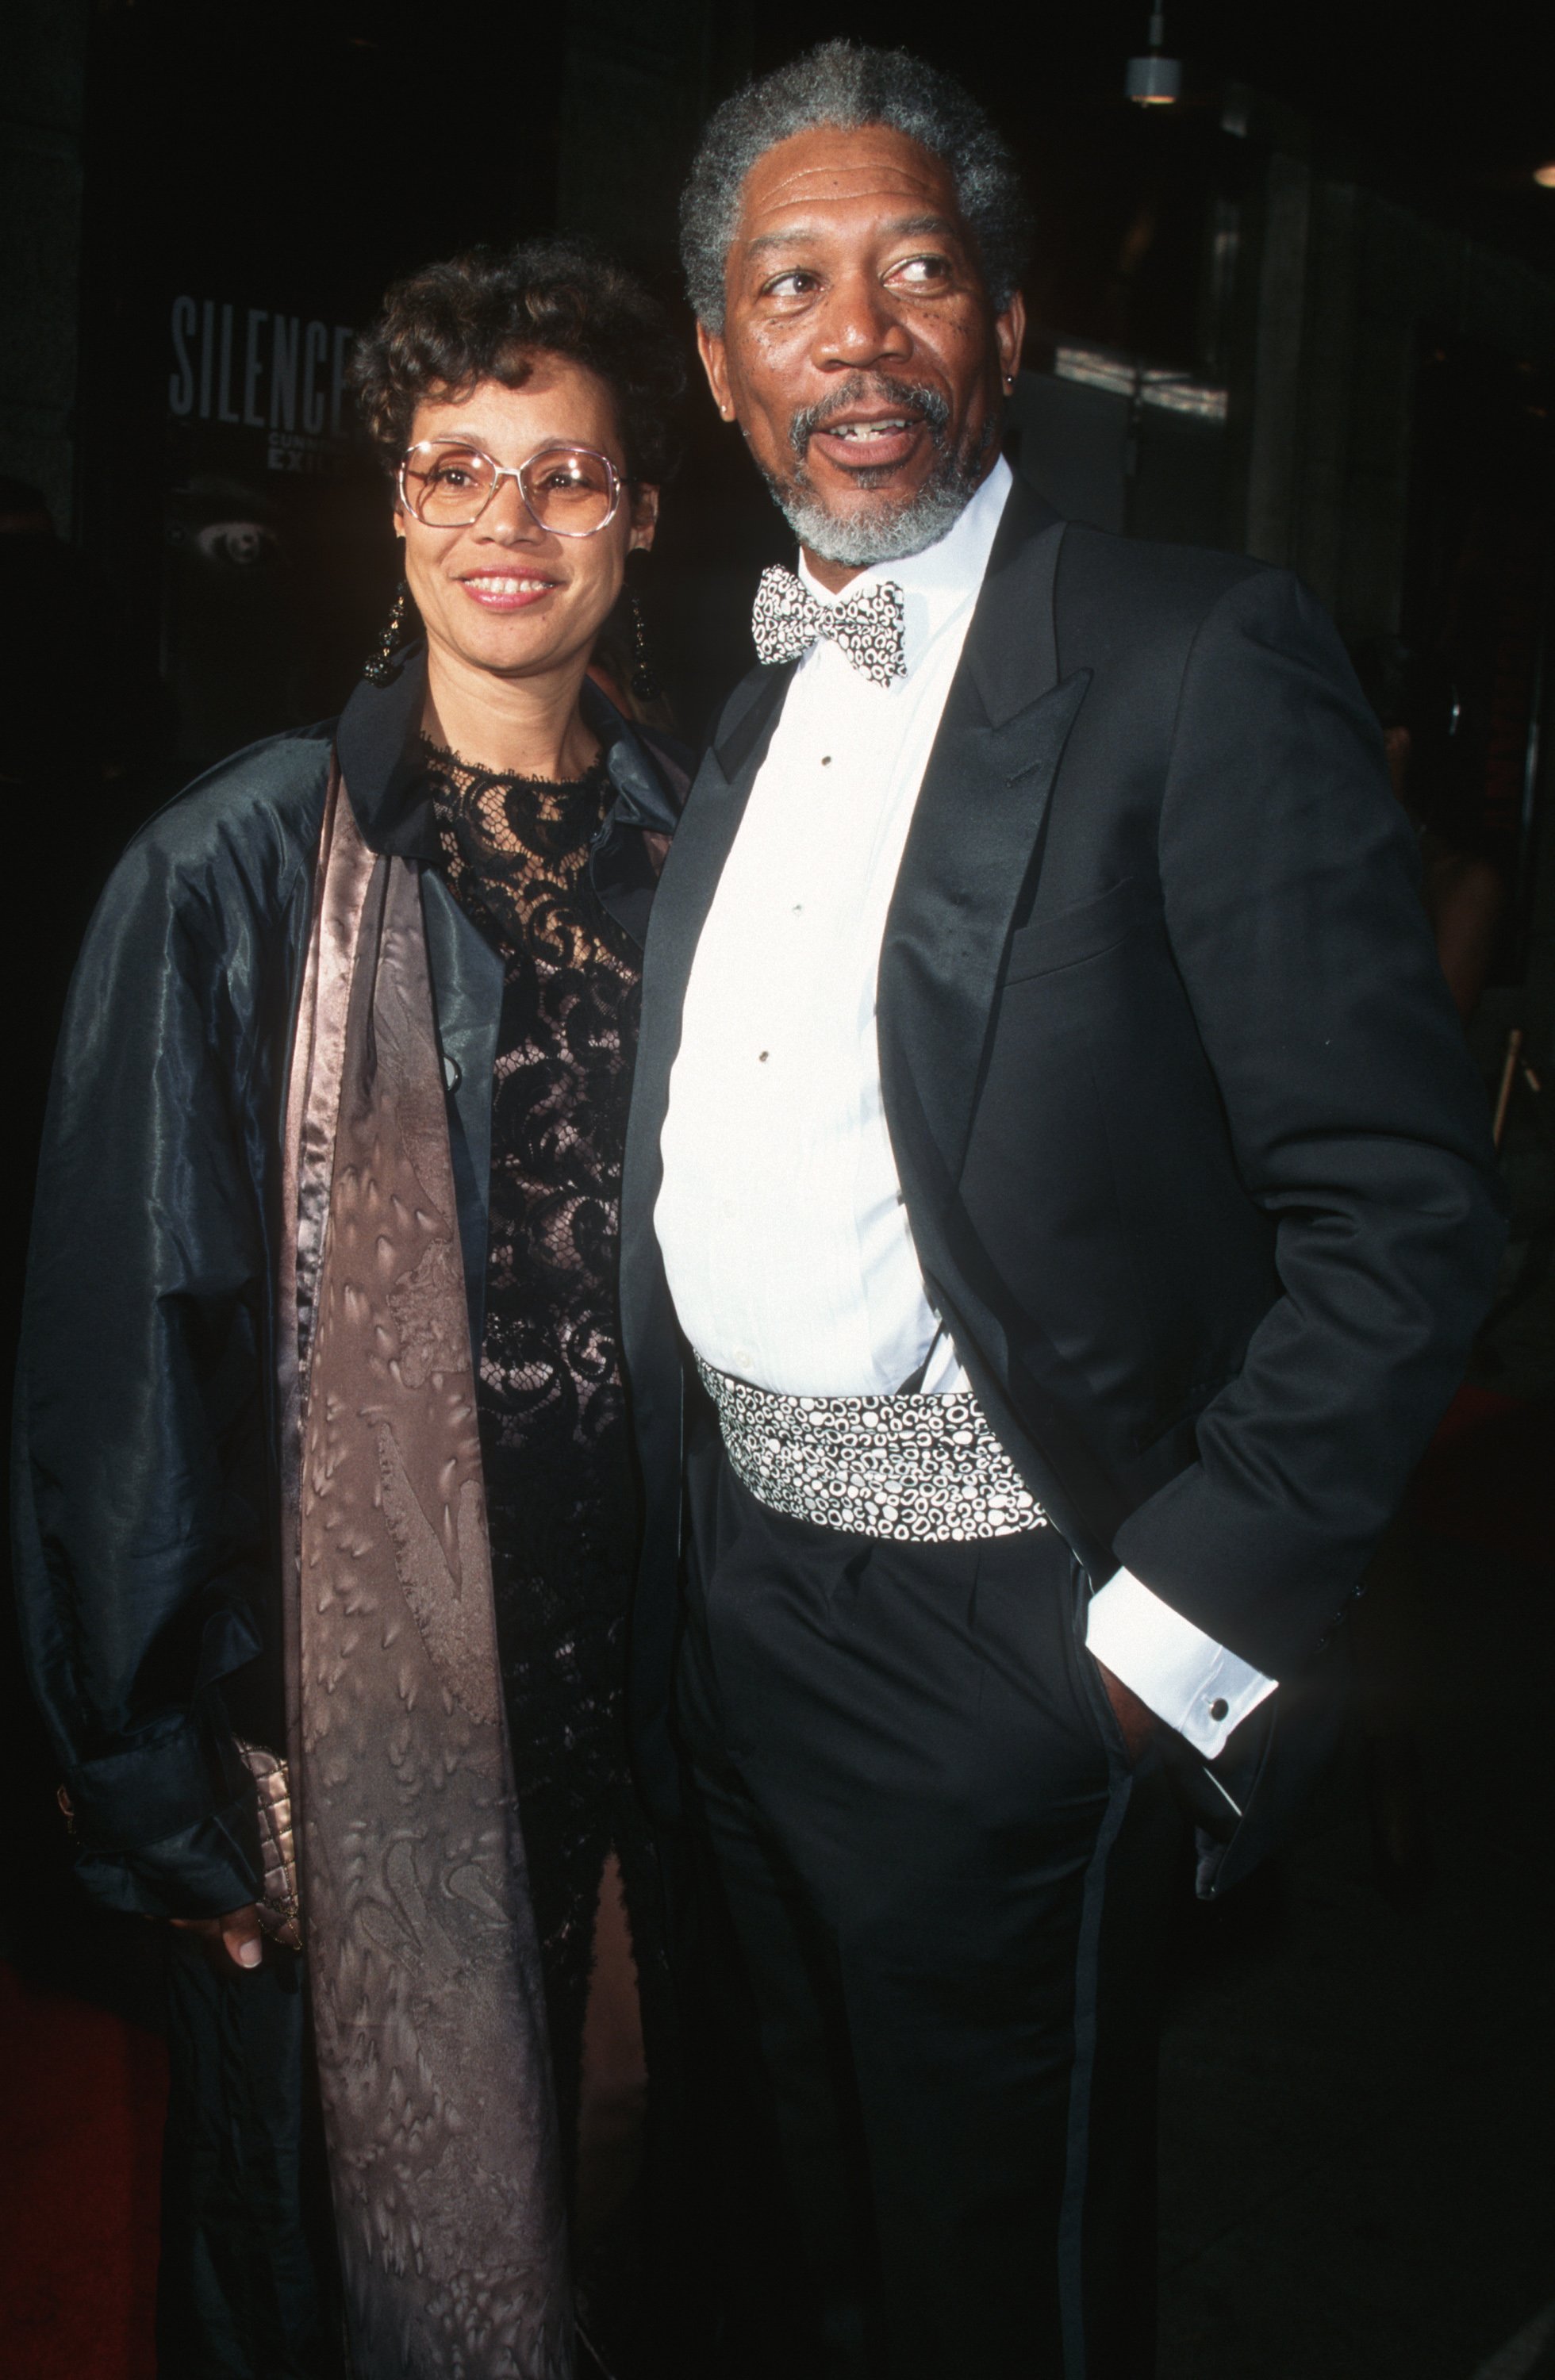 Myrna Freeman and Morgan Freeman during the 6th Annual New York Shakespeare Festival Benefit in New York City. I Source: Getty Images